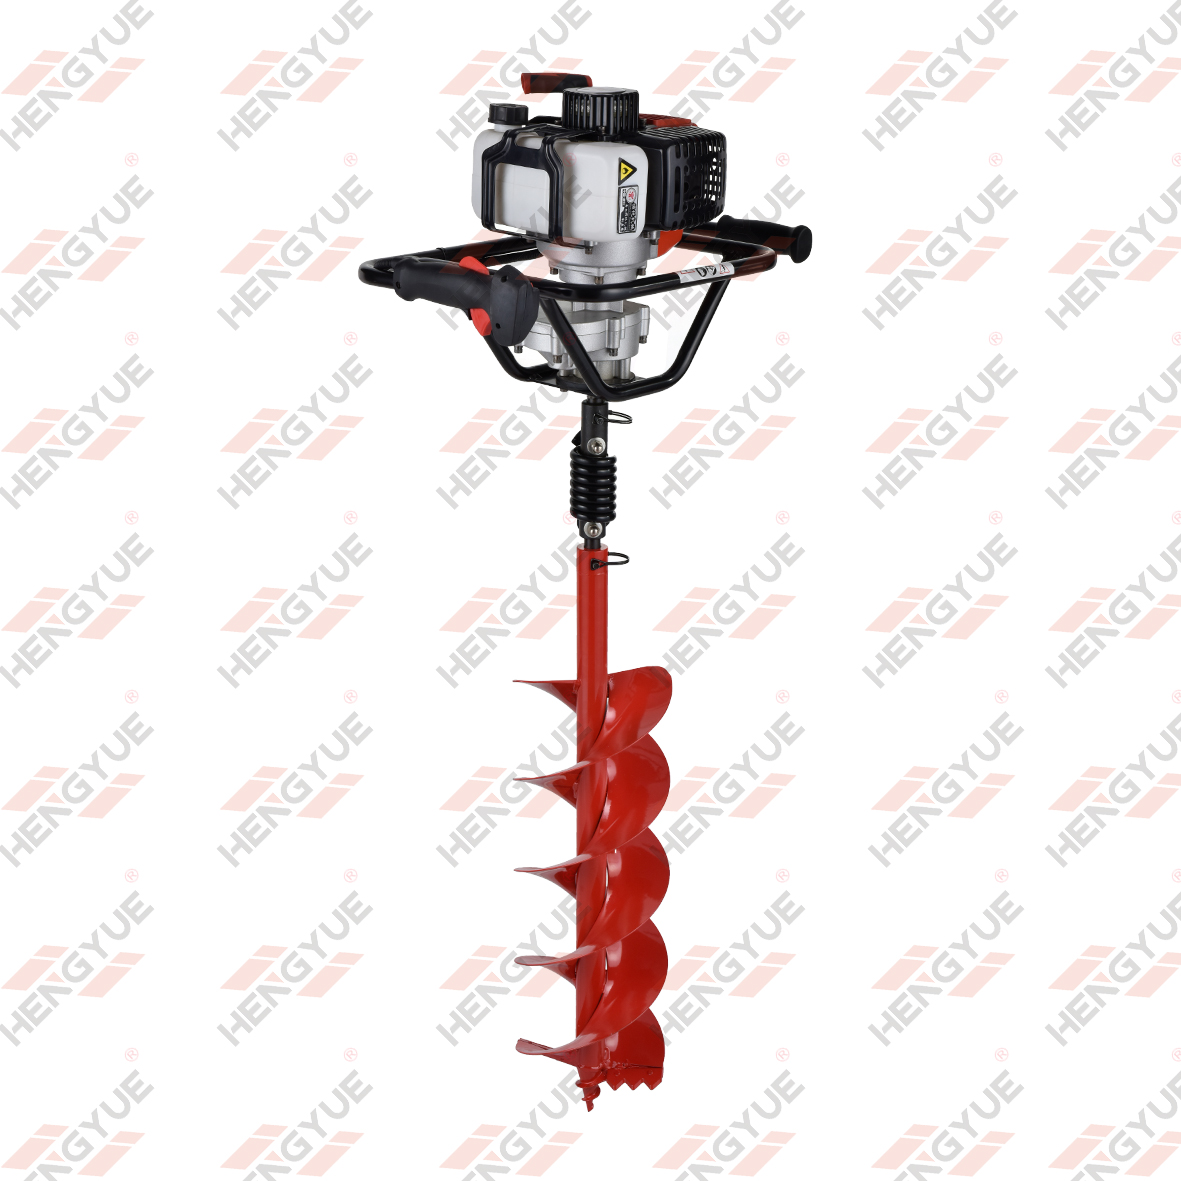 52/58cc Engine Power Earth Auger